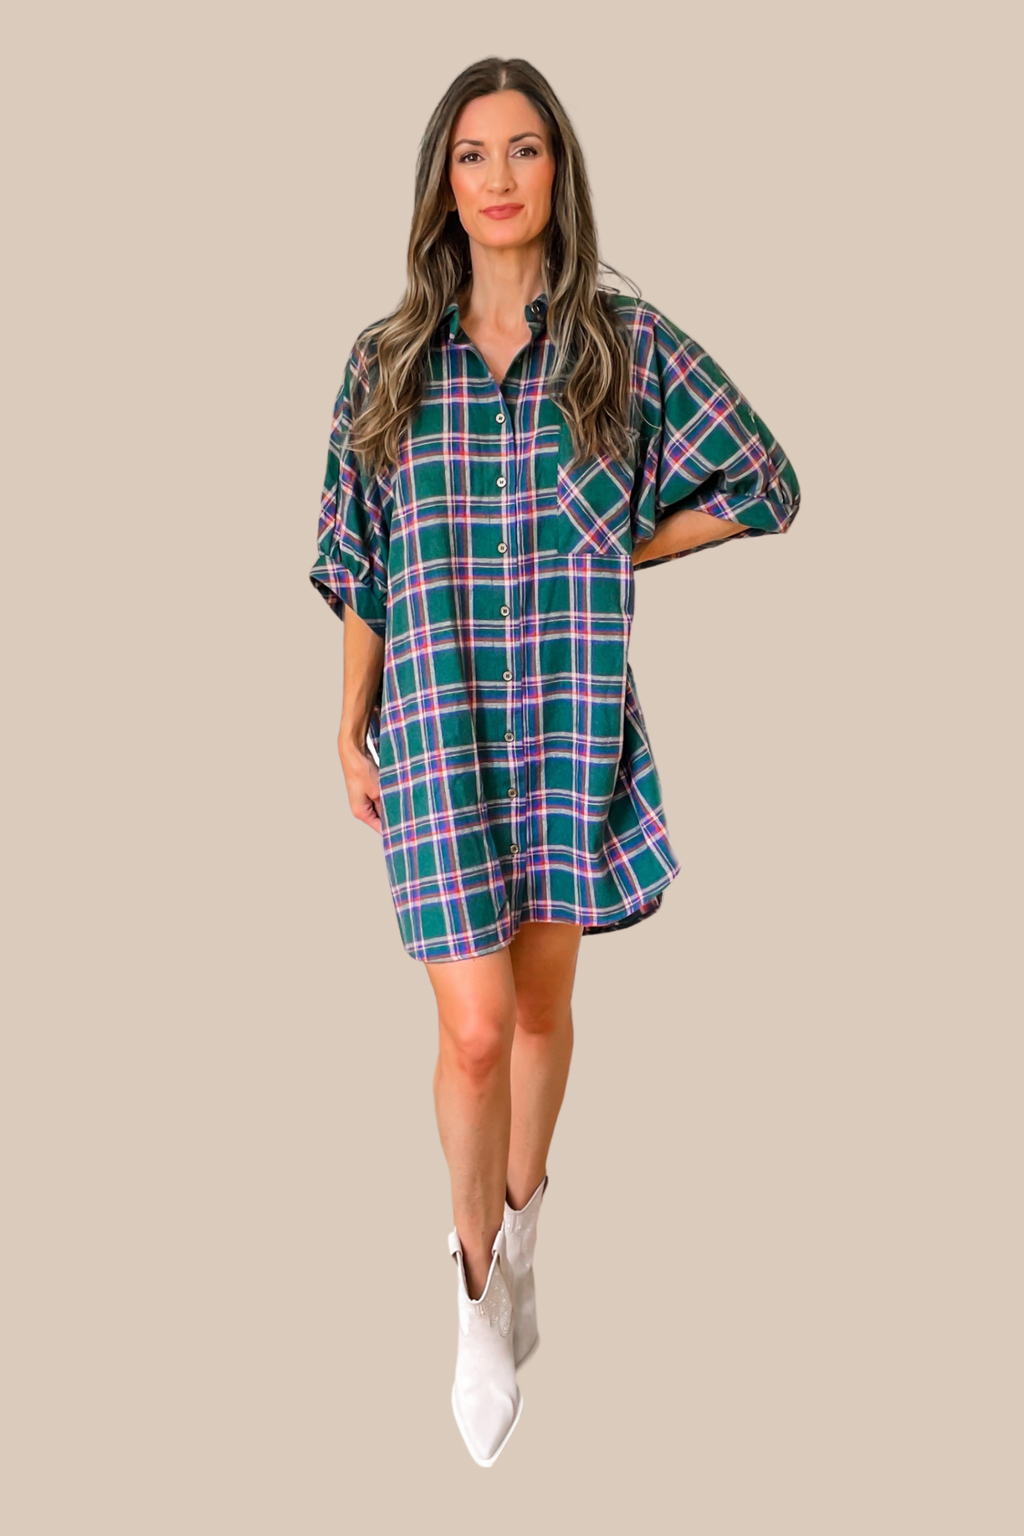 Back To My Roots Plaid Flannel Shirt Dress – Ivy & Olive Boutique